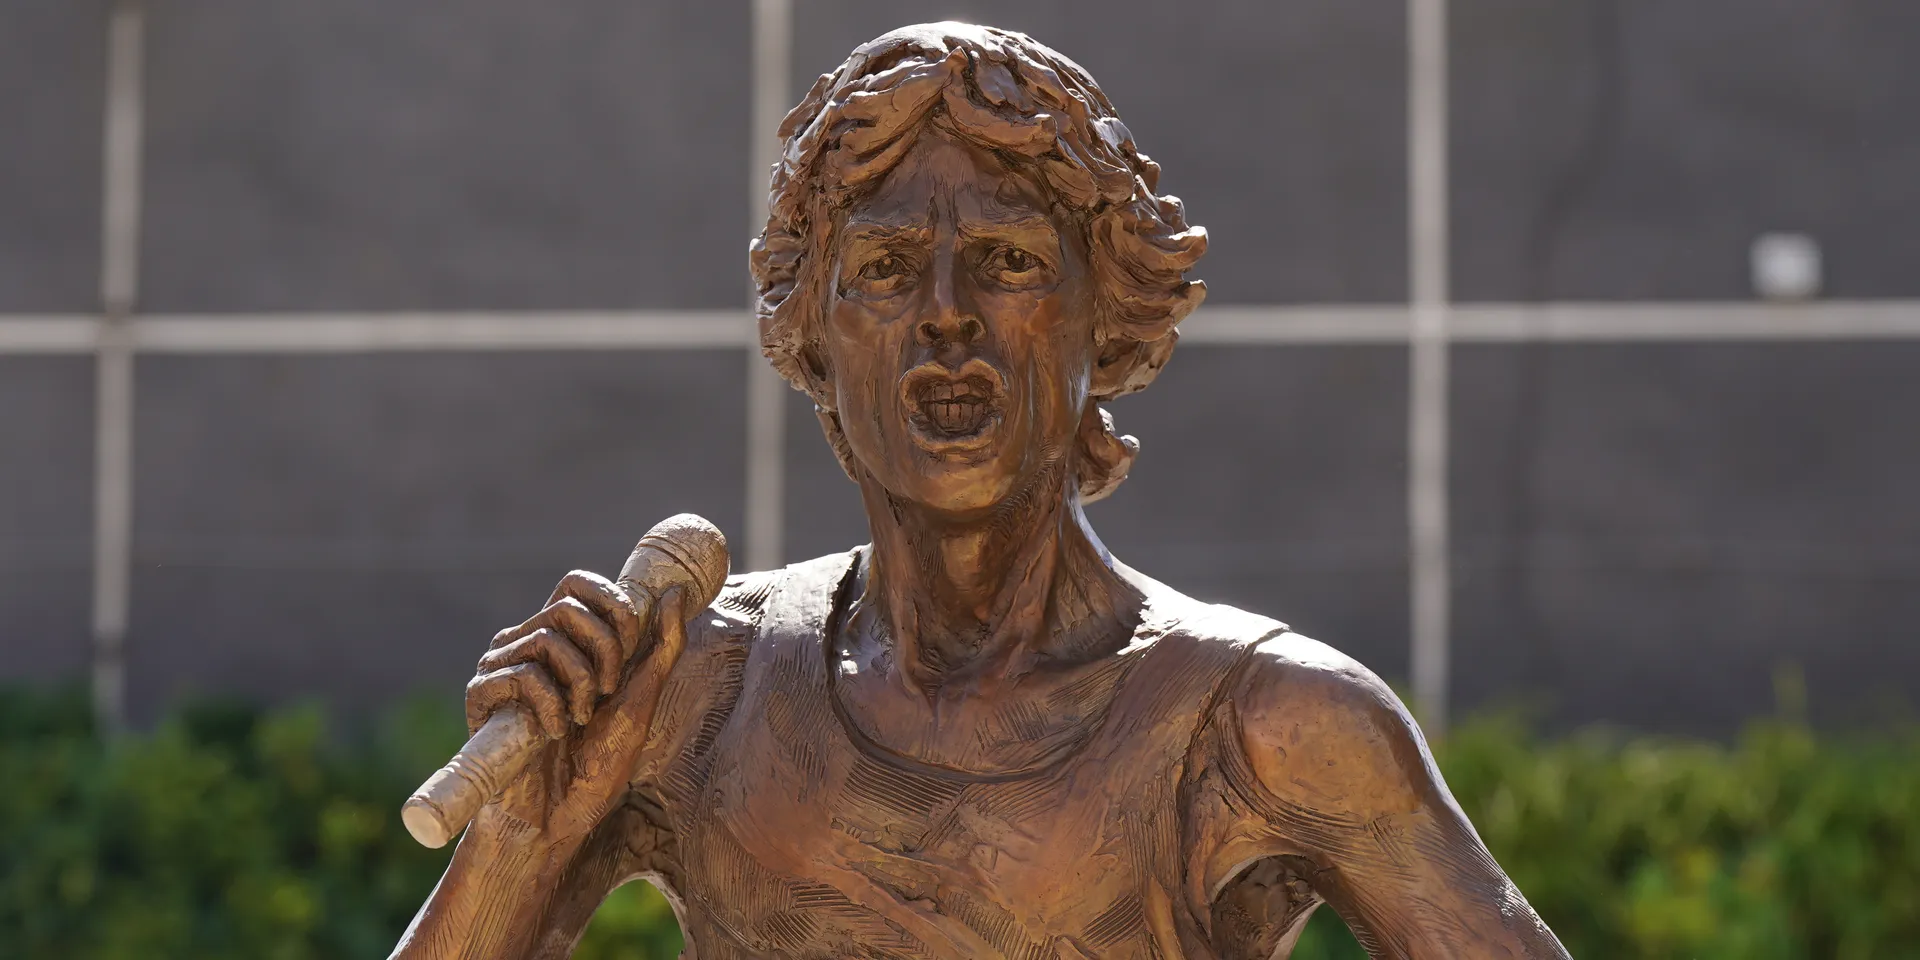 Mick Jagger and Keith Richards Statues Unveiled in Their Hometown